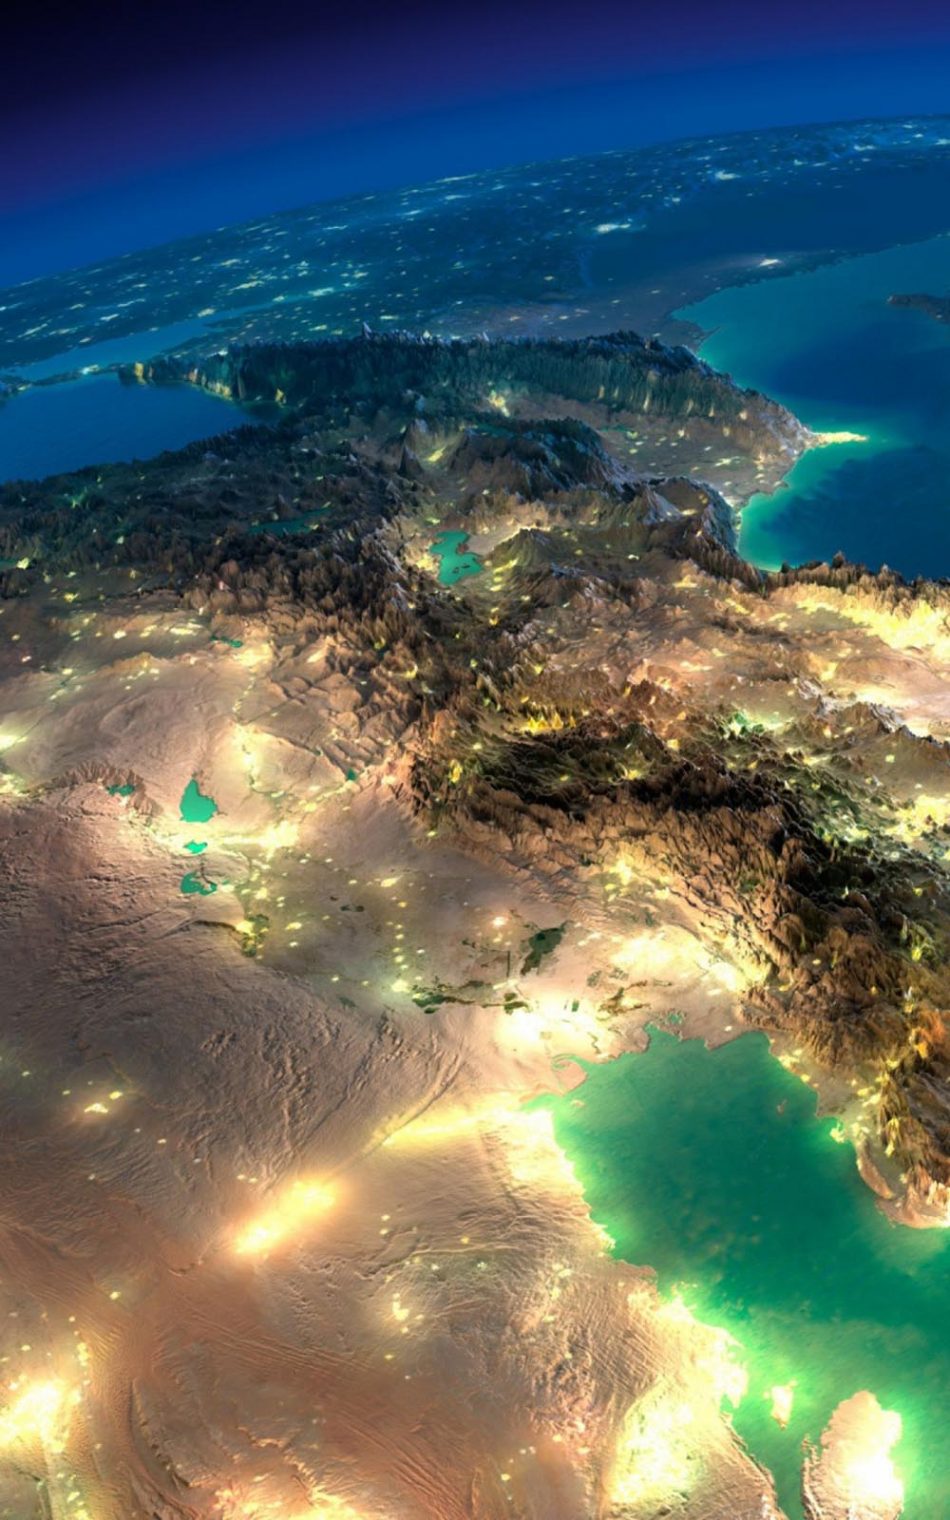 Close Satelite Image Of Earth At Night - Iran From Space At Night - HD Wallpaper 